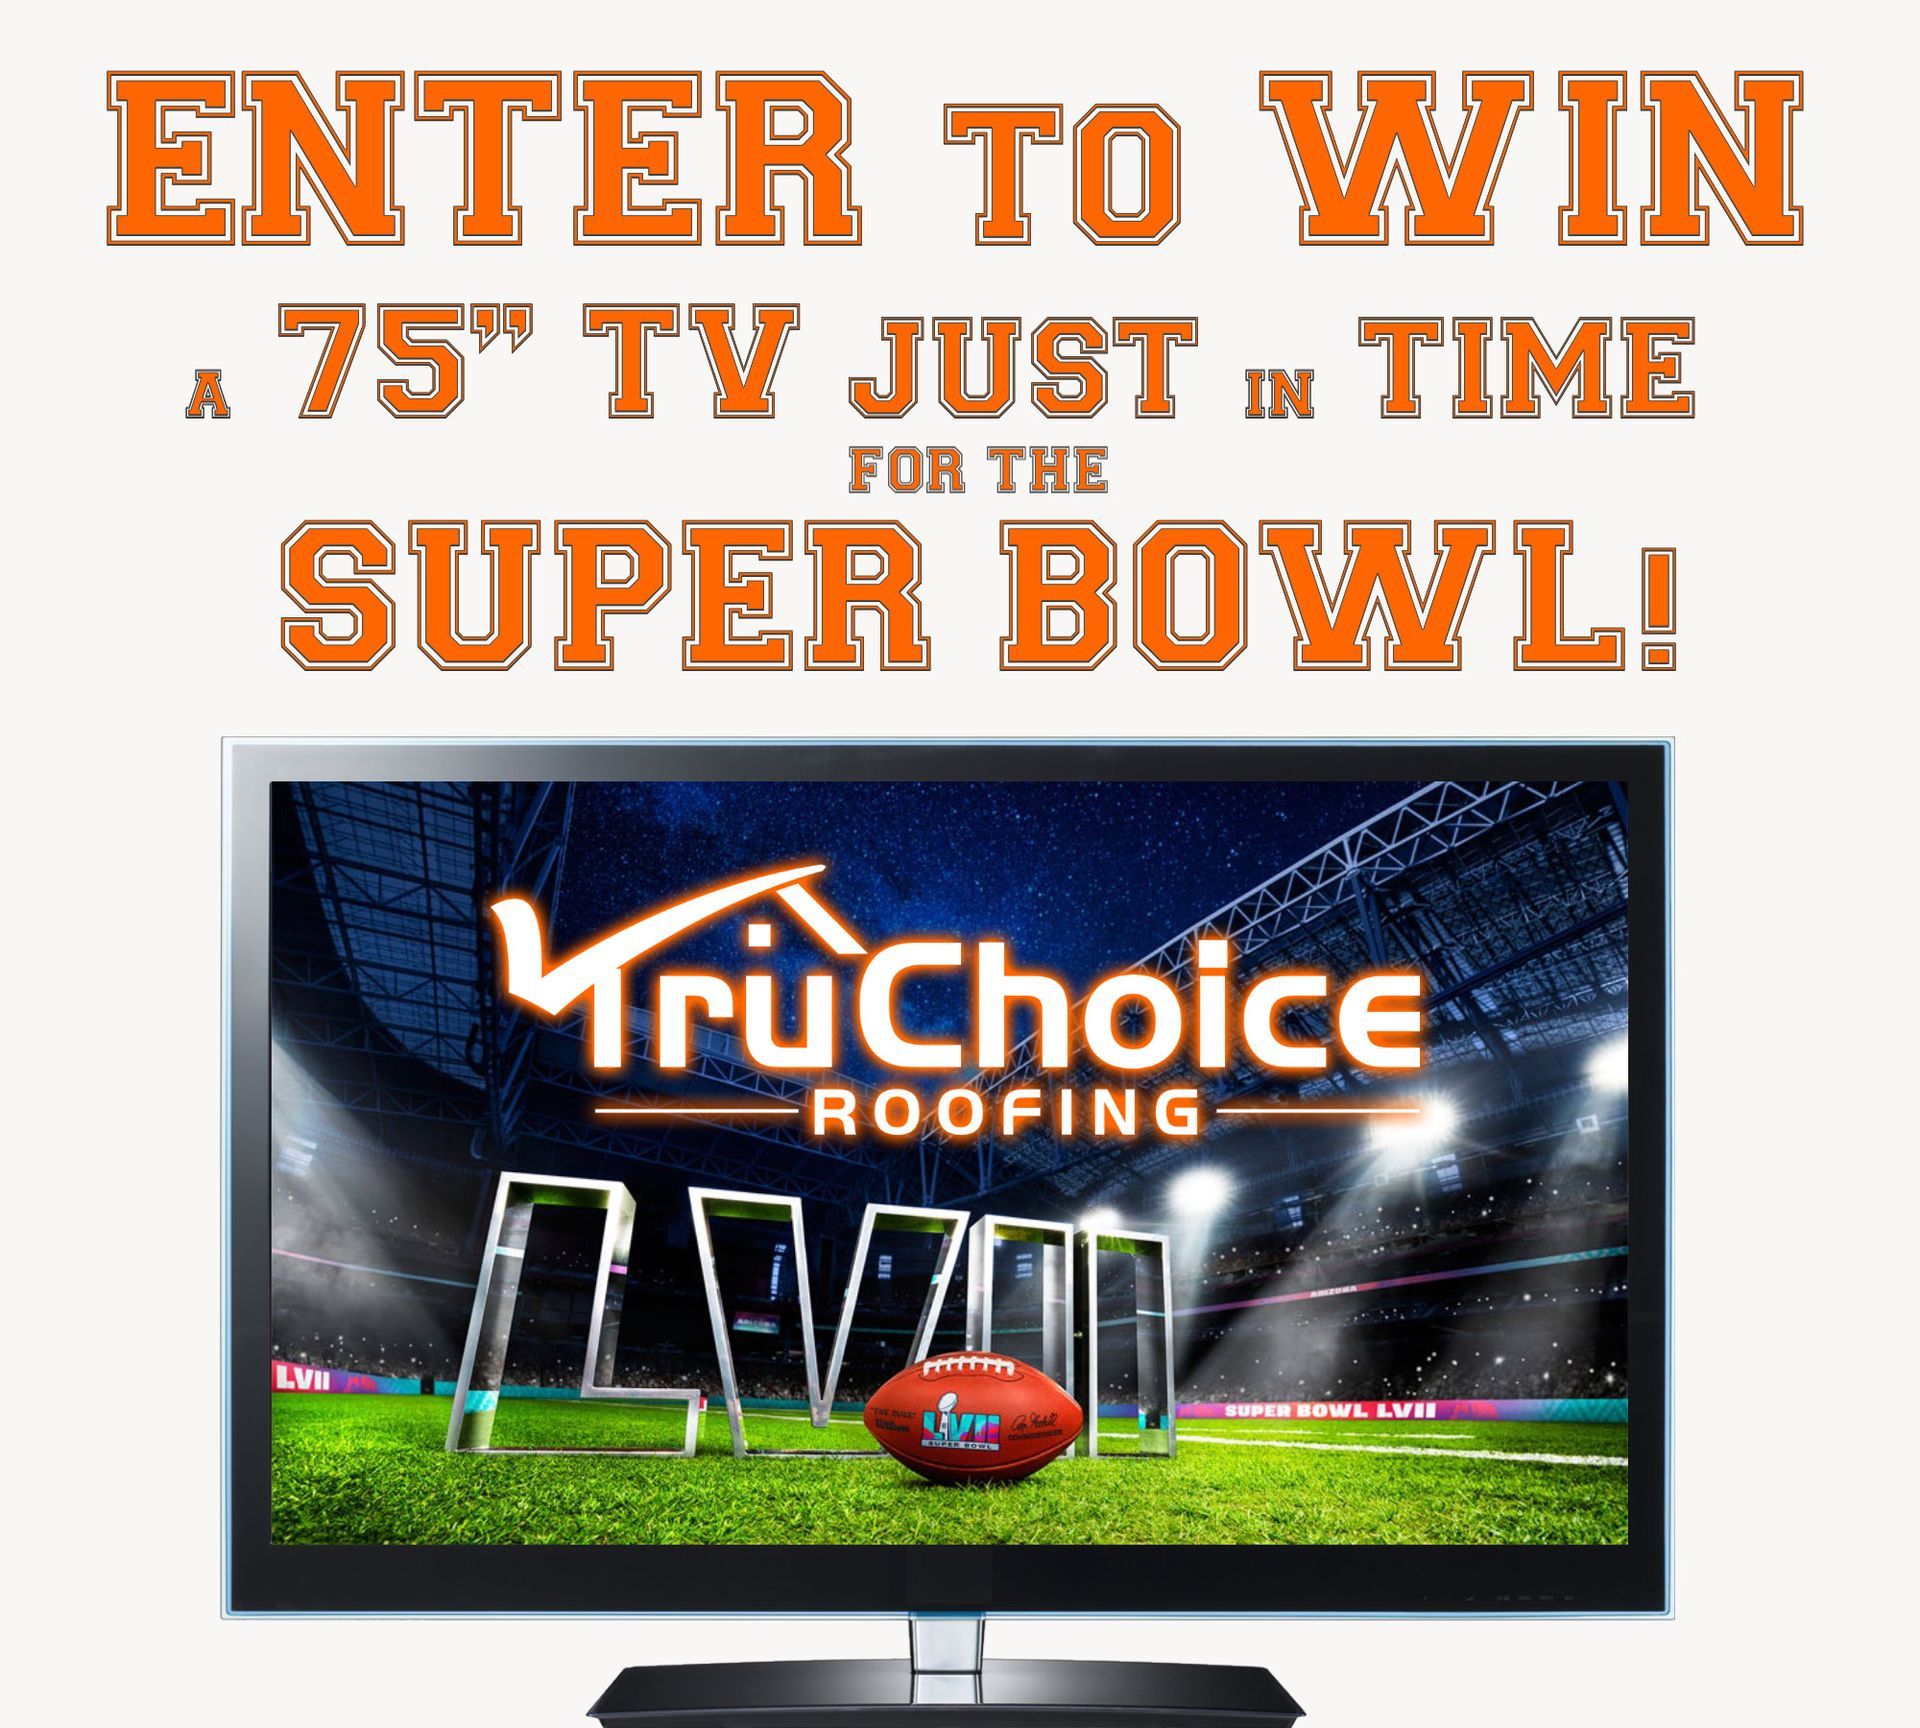 win a tv just in time for the Super Bowl